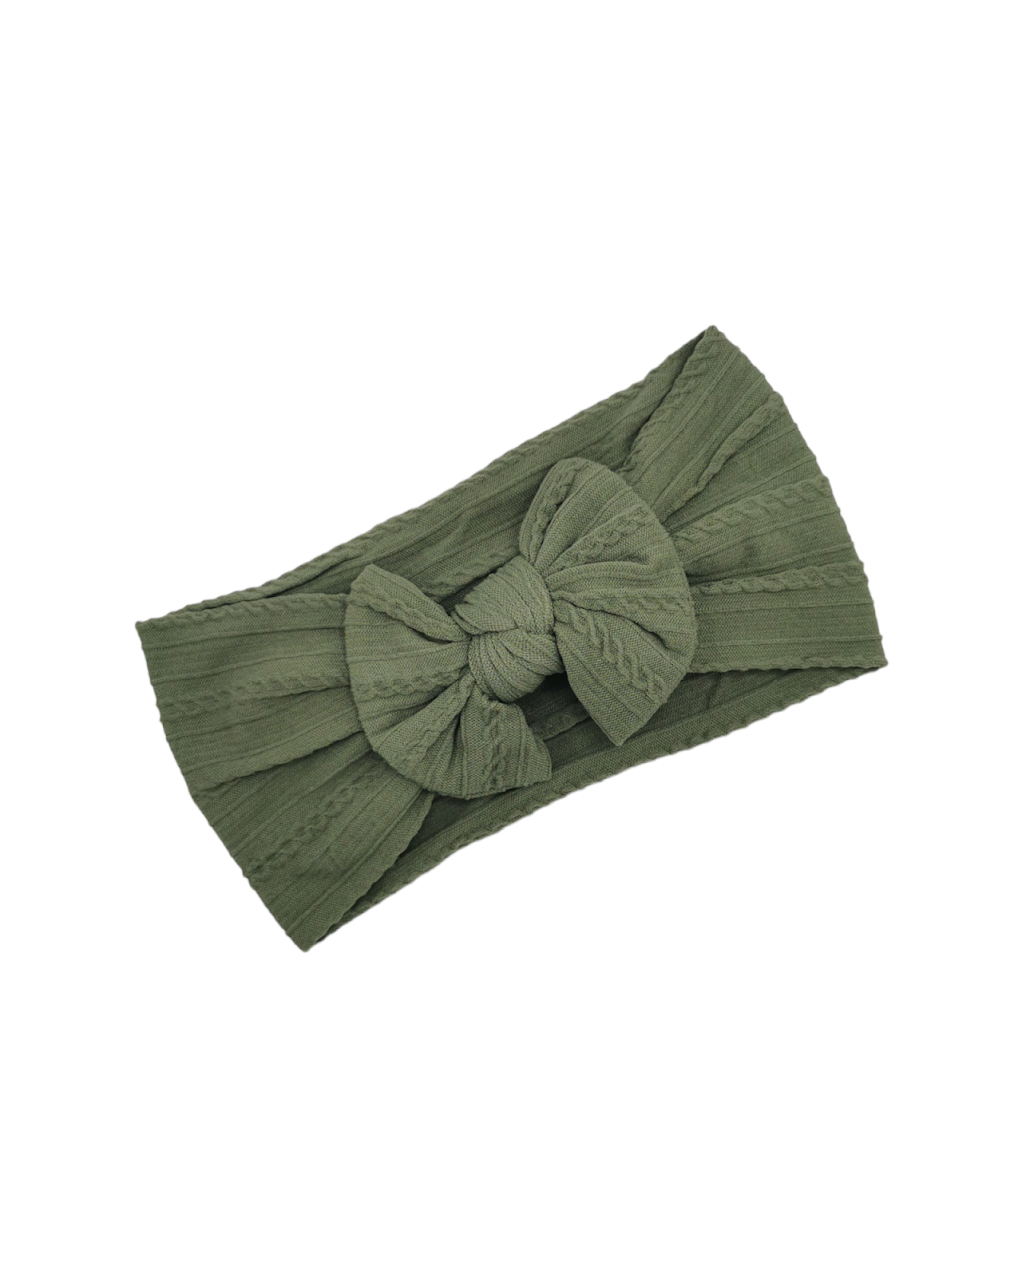 Adult Size - Fern Green Cable Headwrap - Betty Brown Boutique Ltd